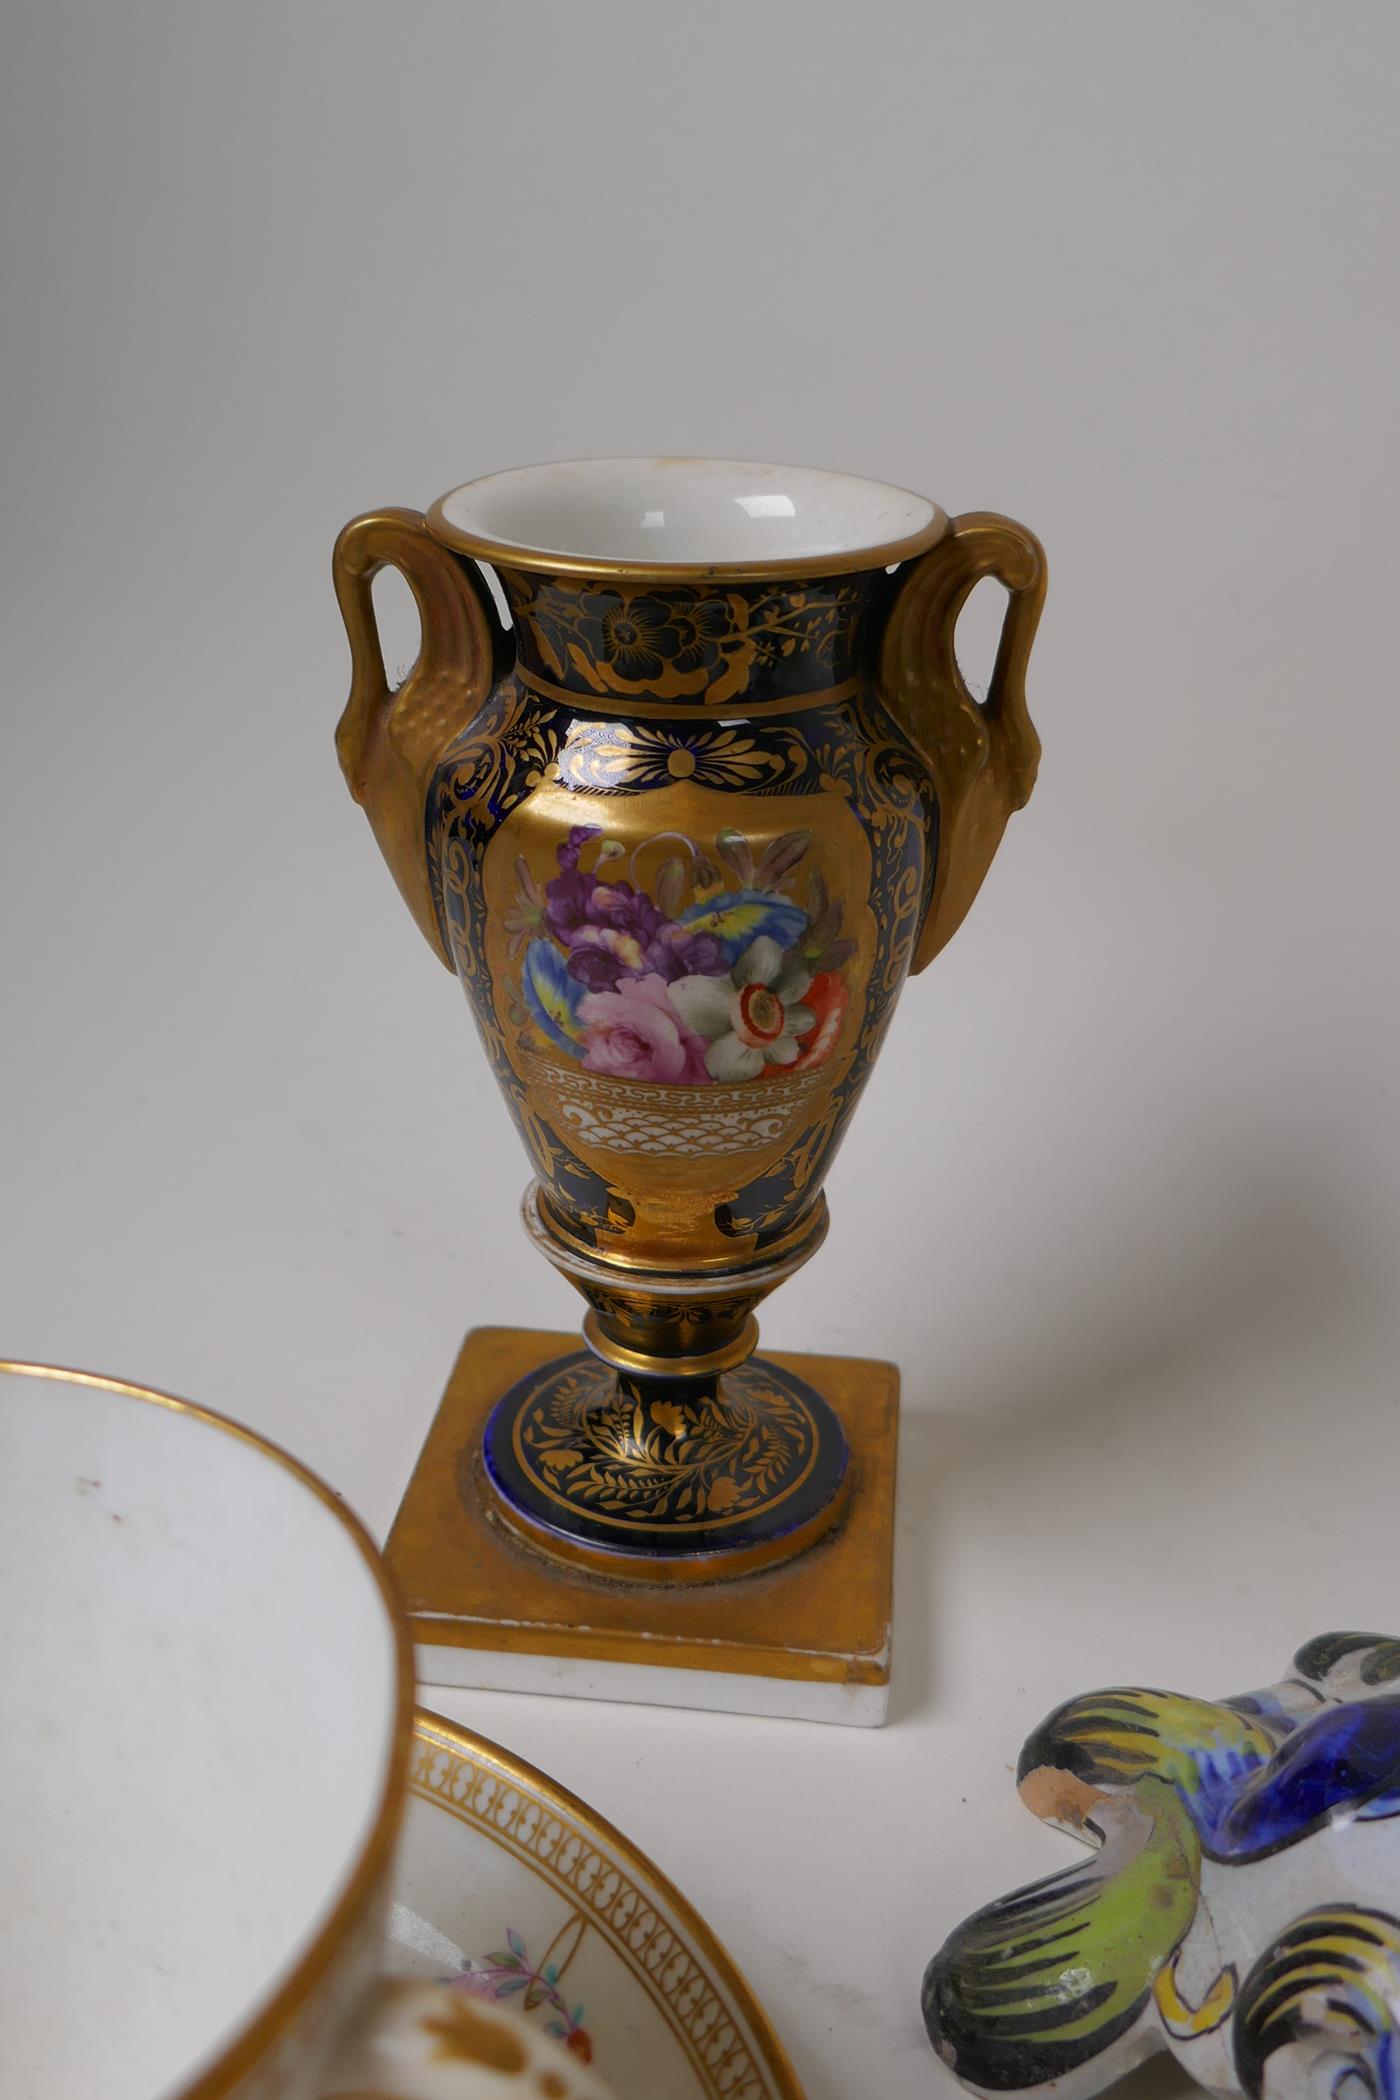 A quantity of C19th and early C20th British and Continental porcelain items including cups, saucers, - Image 5 of 9